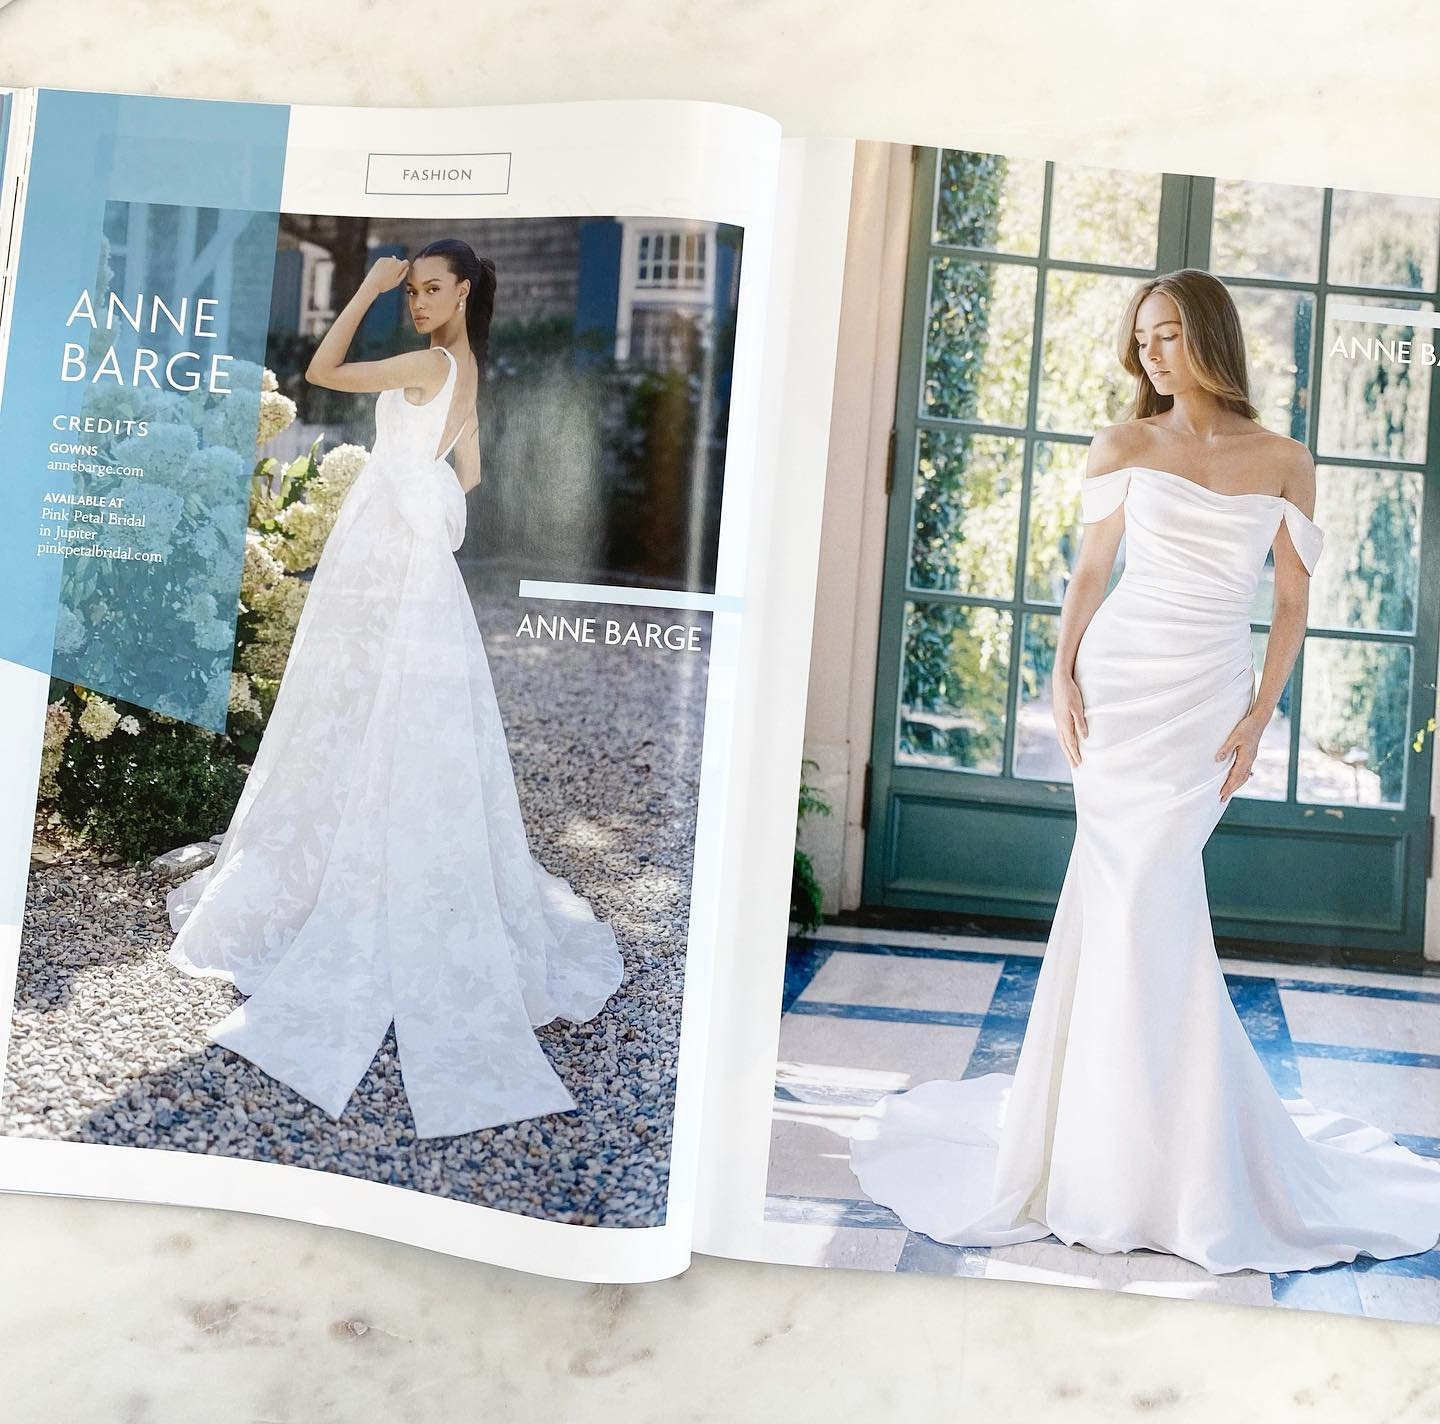 Modern-Classic-Timeless @annebarge Loving the features in @flweddingsmagazine Two of my favorite designs. Naomi &amp; Liberty both from the Blue Willow collection. Book your 2 hour private bridal appointment to find your dream dress!!👗
.
.
#dreamwed